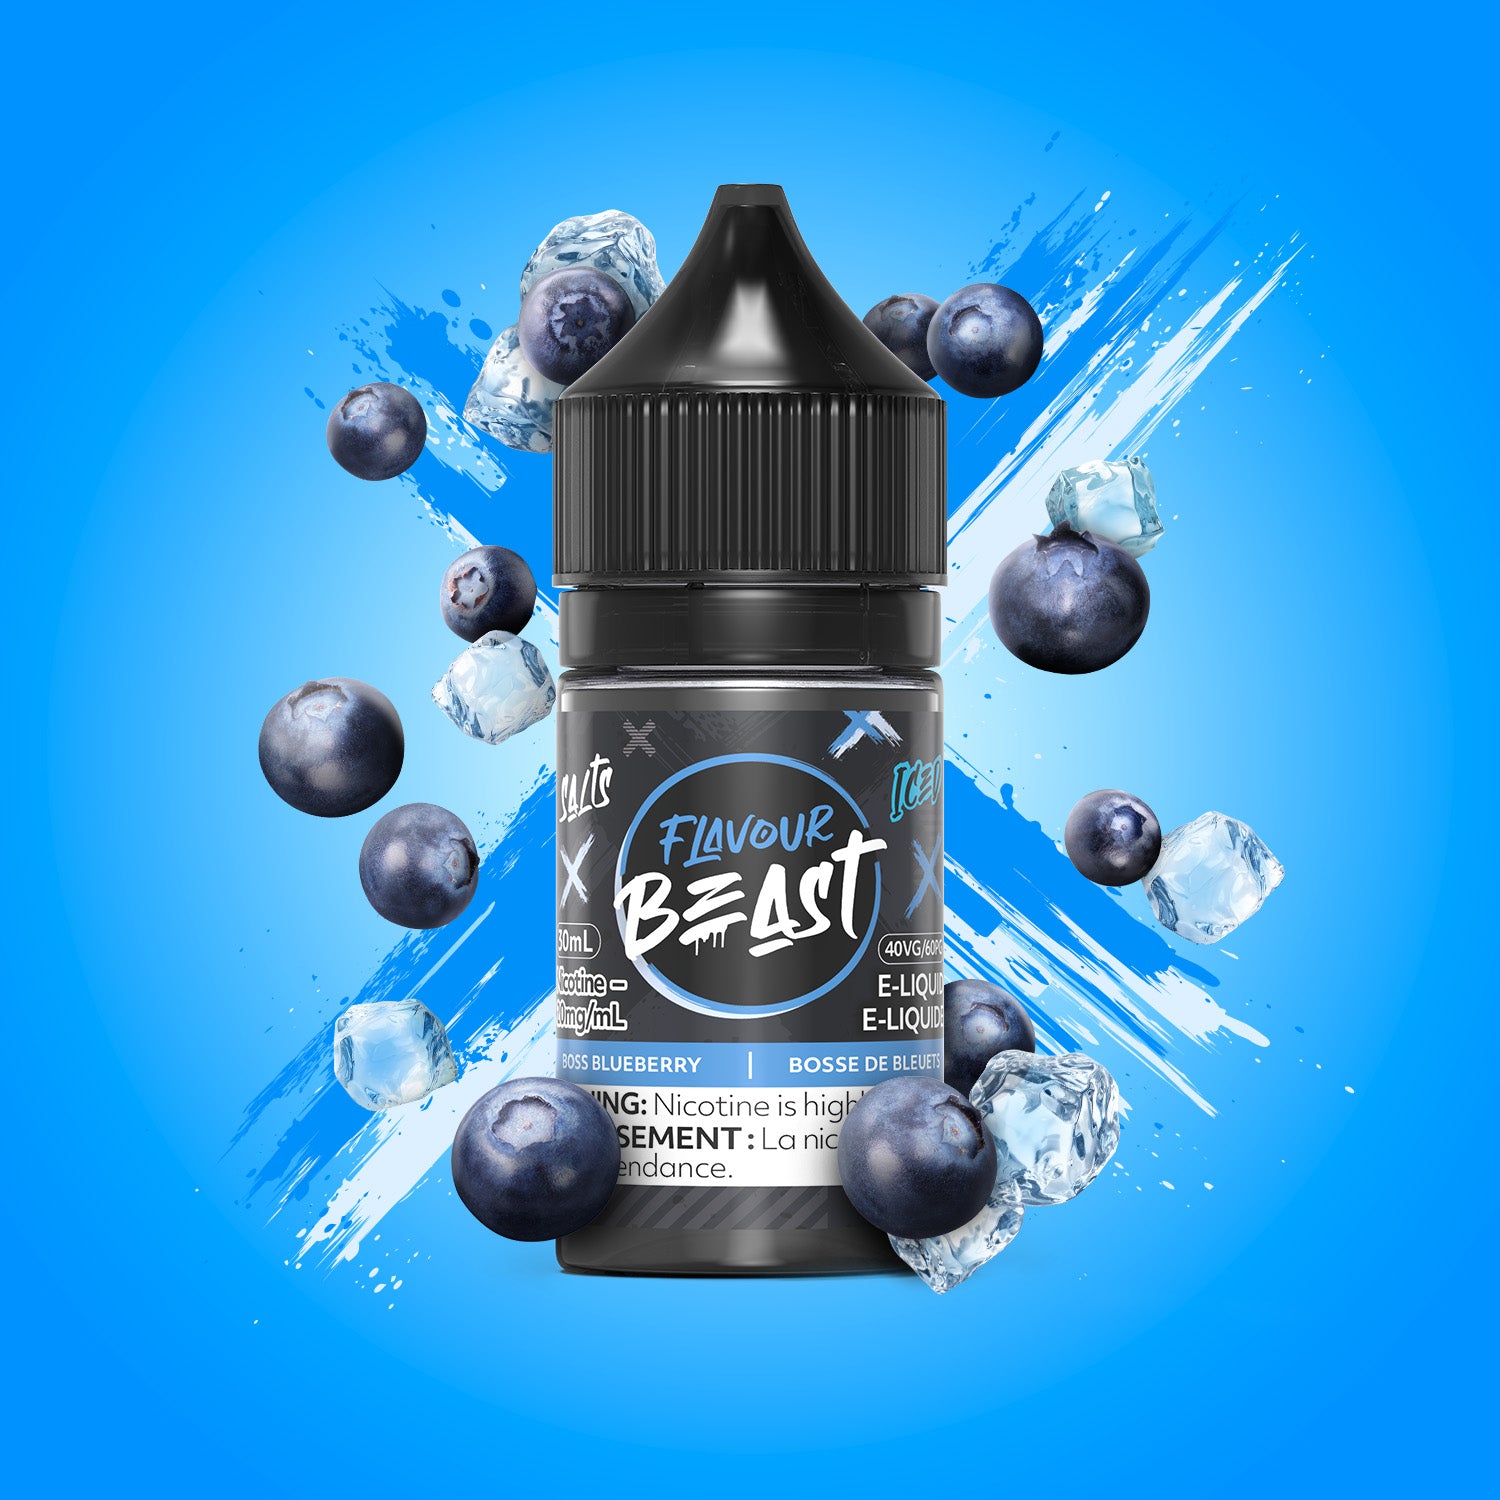 BOSS BLUEBERRY - Flavour Beast E-Liquid - 30ml - EXCISED